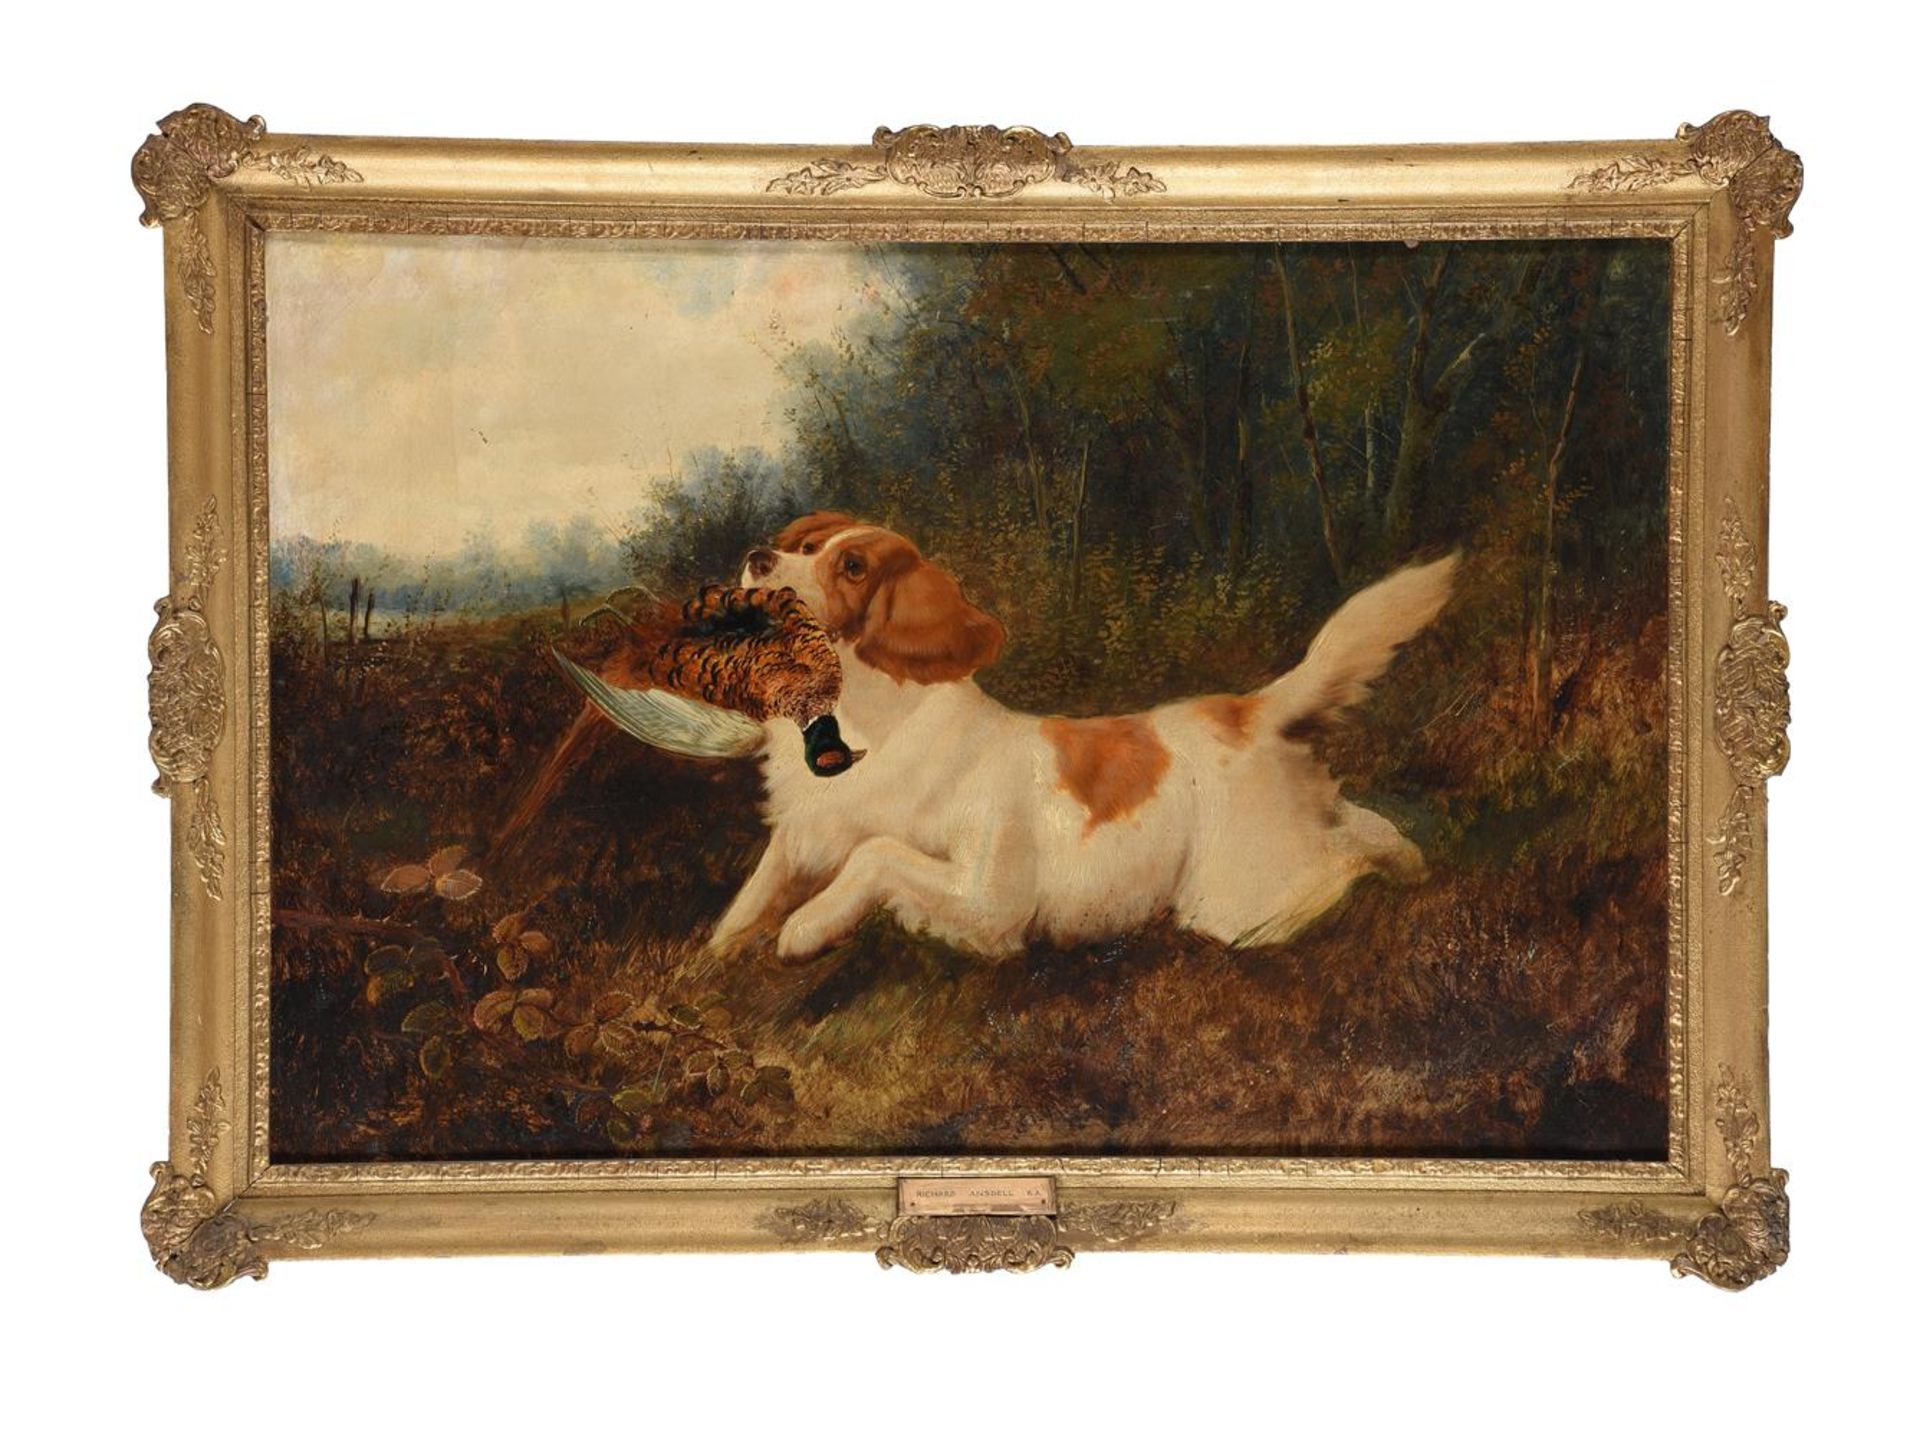 Follower of Richard Ansdell, Spaniel on the hunt - Image 2 of 2